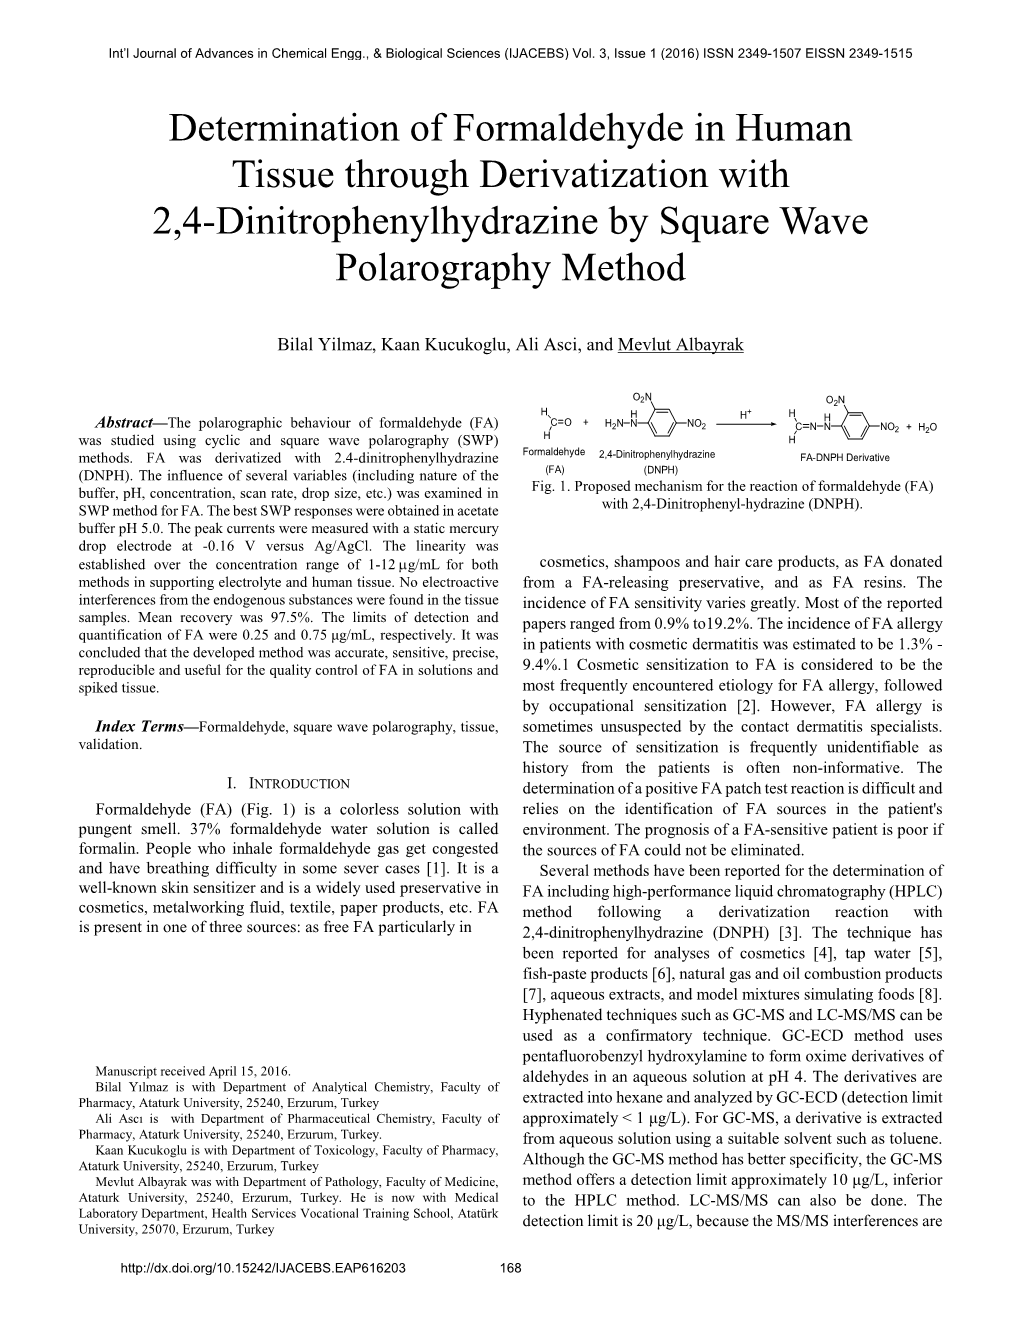 Determination of Formaldehyde in Human Tissue Through Derivatization with 2,4-Dinitrophenylhydrazine by Square Wave Polarography Method